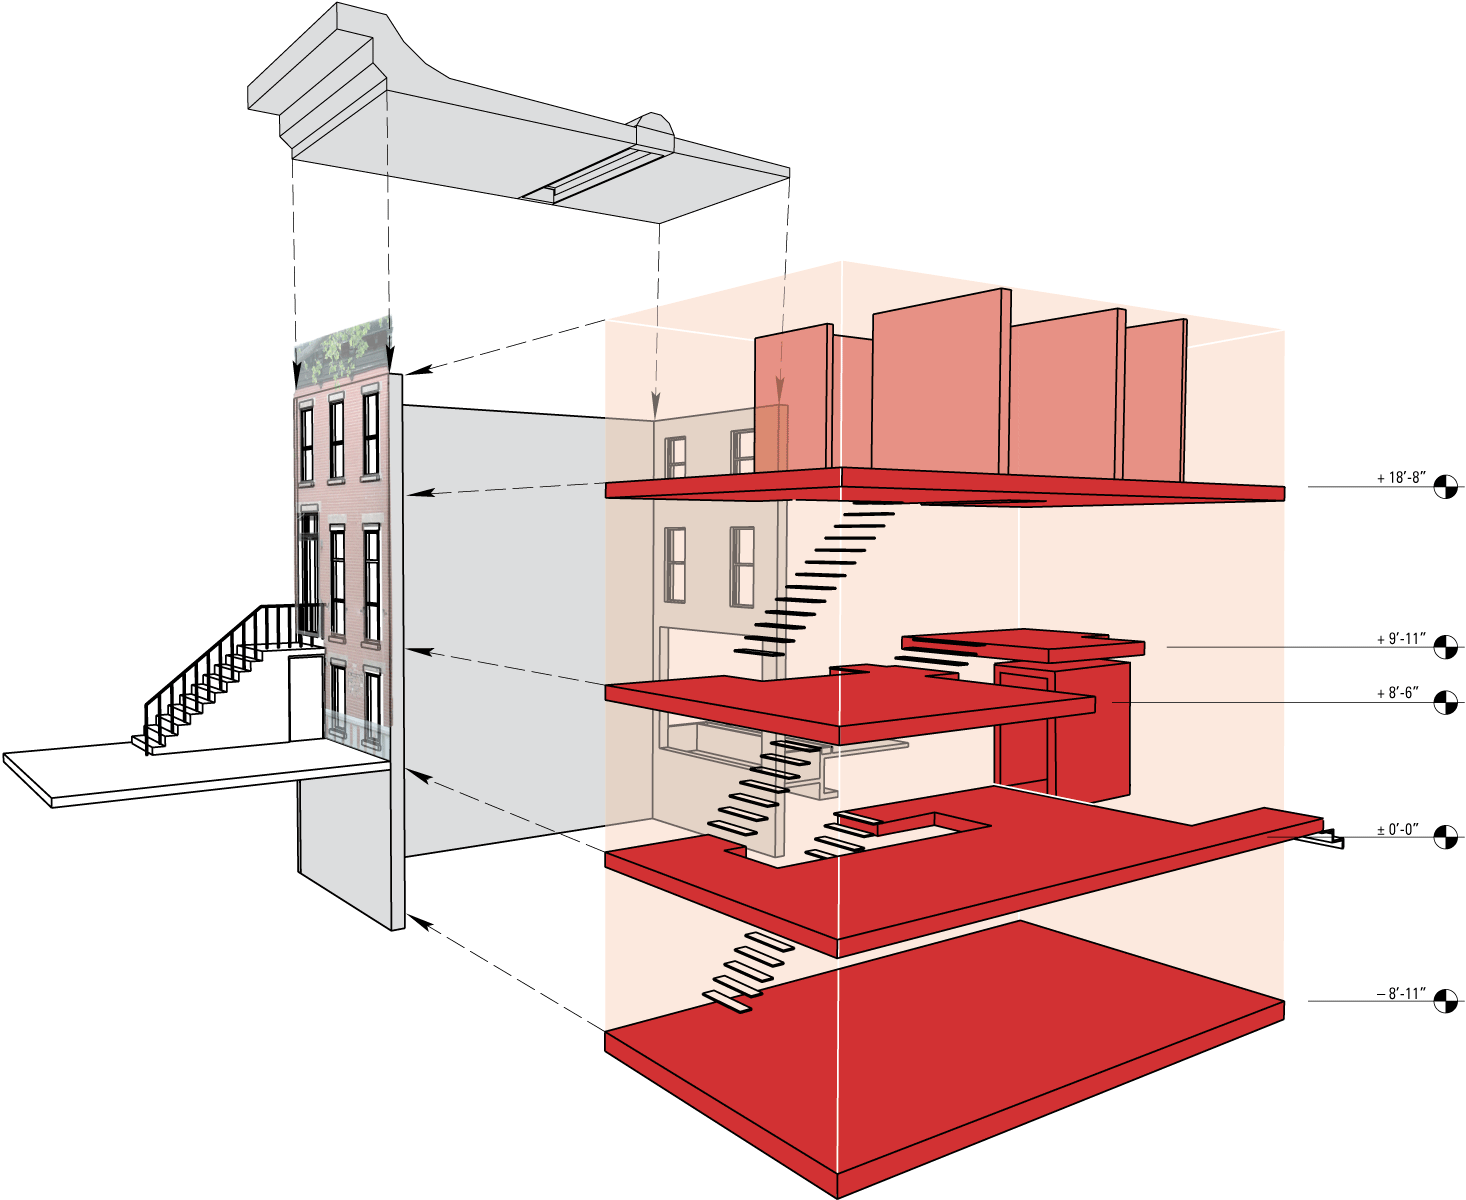 An exploded 3d perspective shows the reconfigured floor plates.